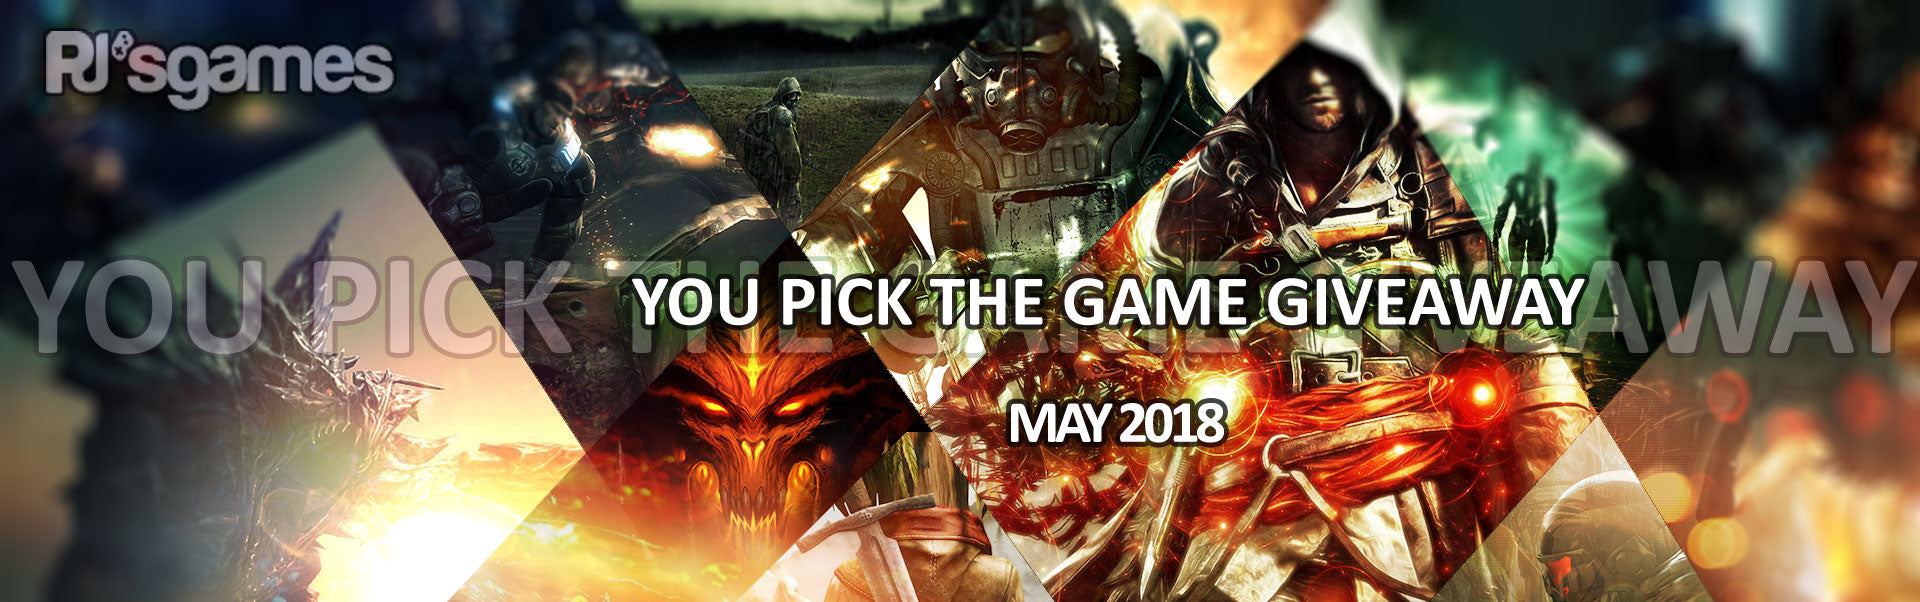 PJ's Games "You Pick The Game" Giveaway May 2018